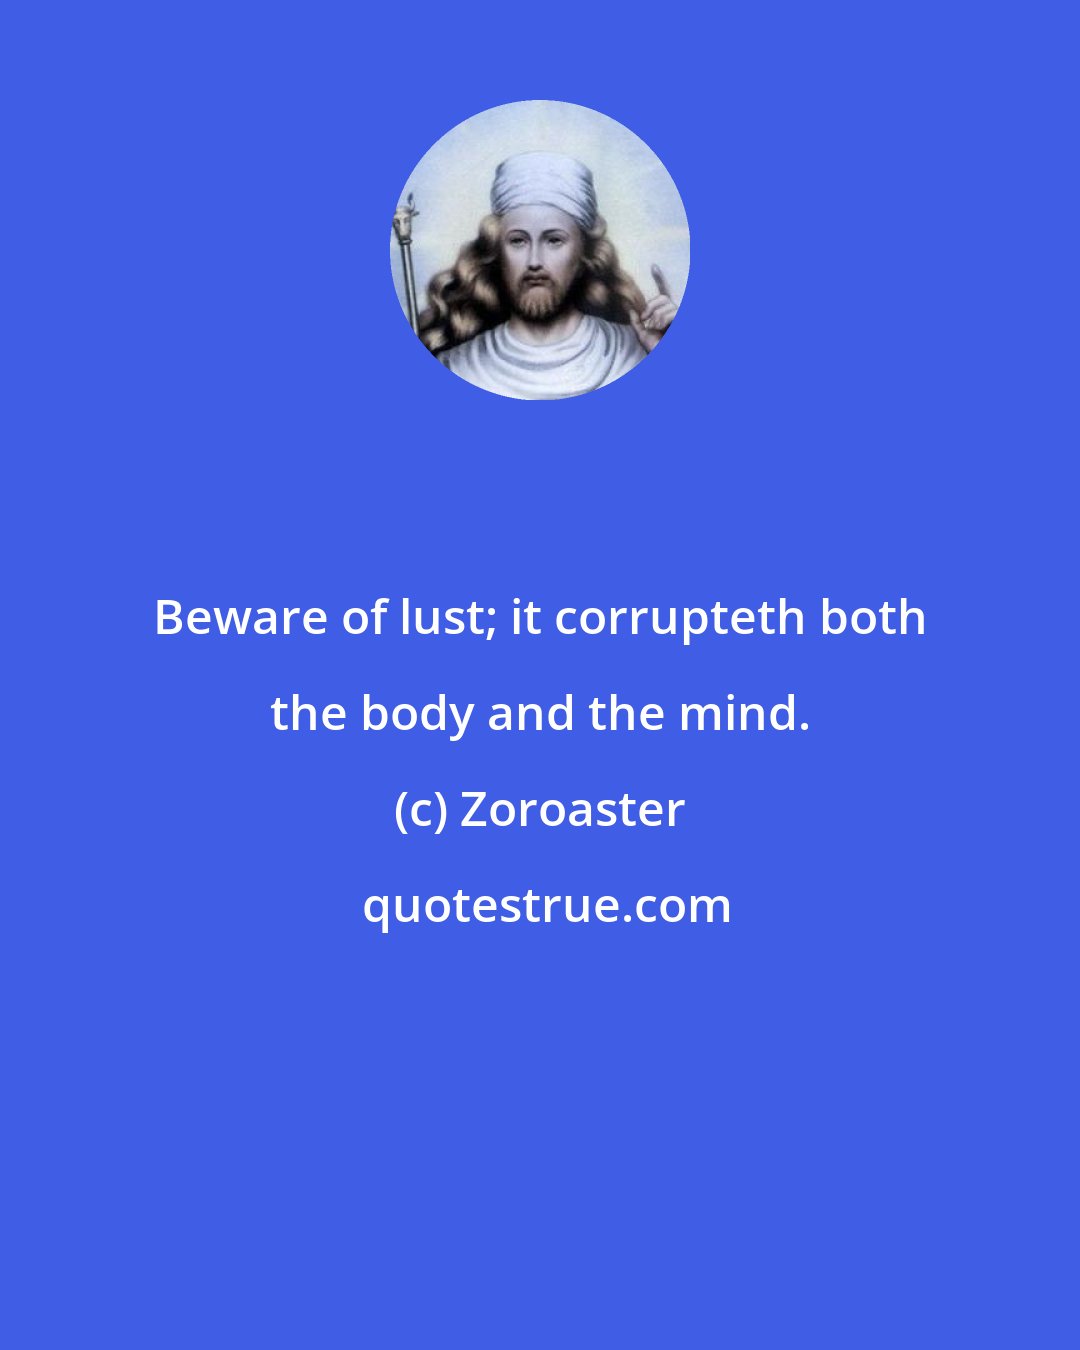 Zoroaster: Beware of lust; it corrupteth both the body and the mind.